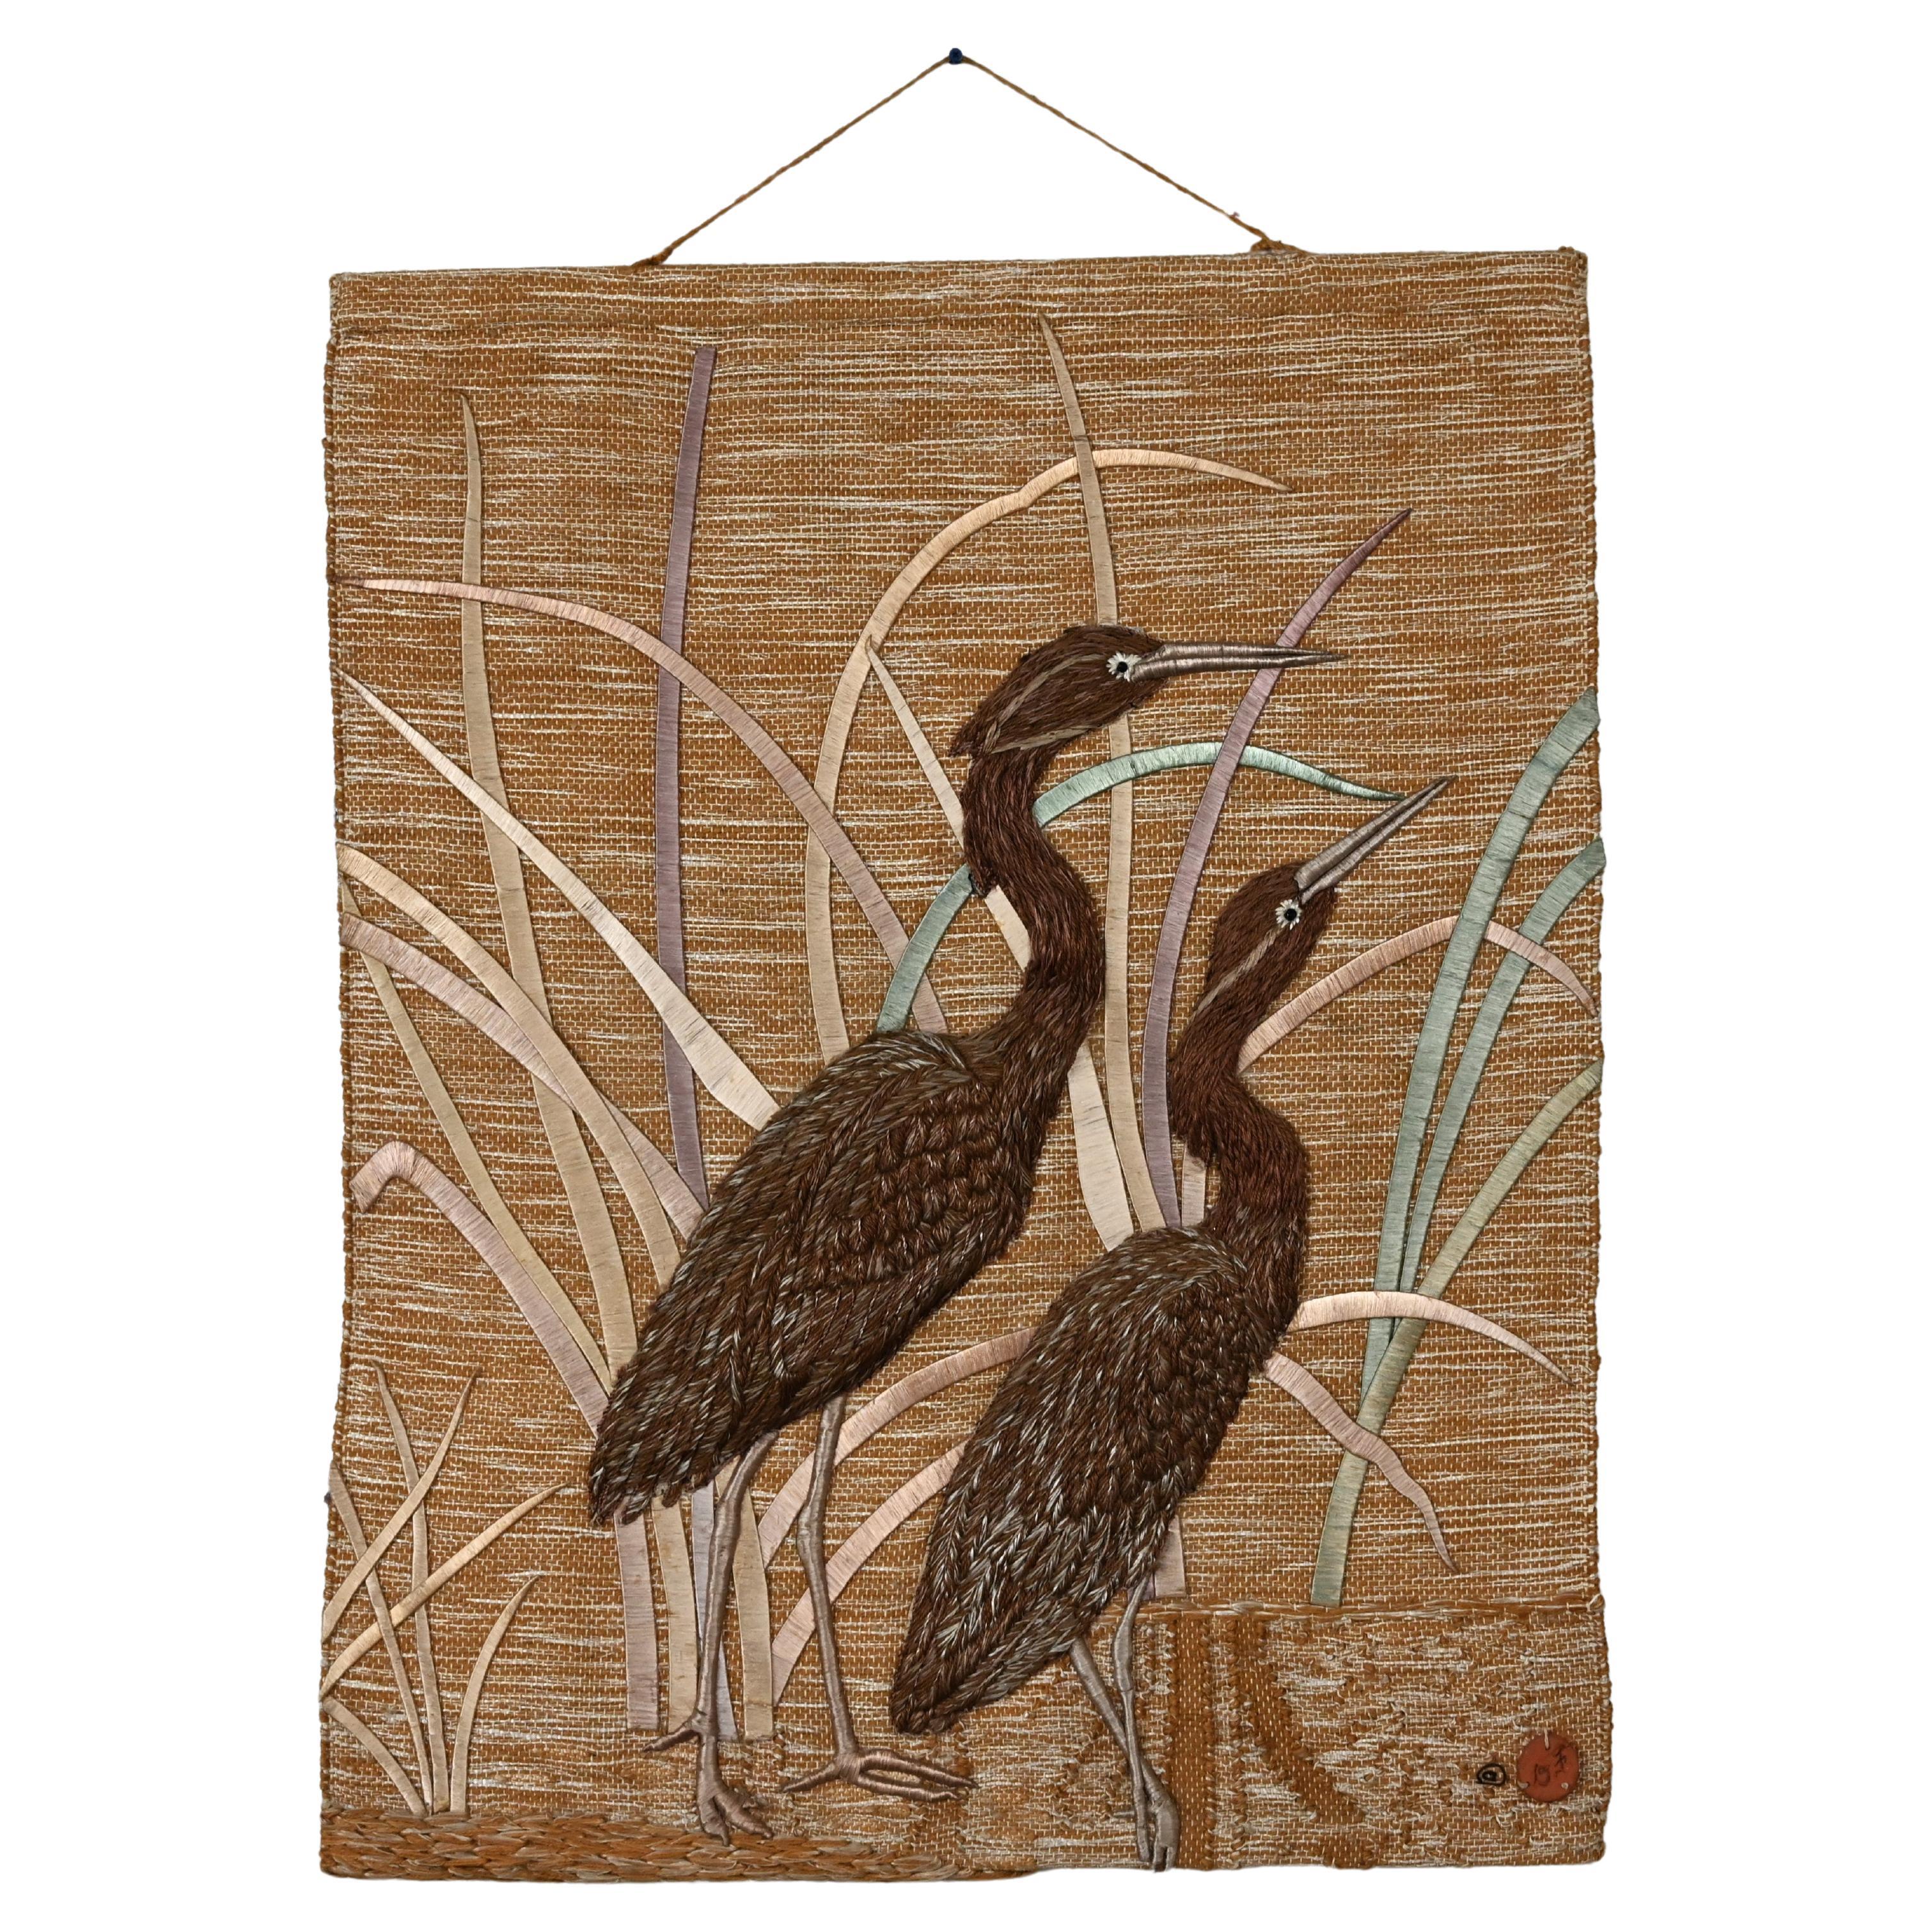 1992 Modern Textile Woven Cranes & Grass Wall Hanging #418 by Don Freedman  For Sale